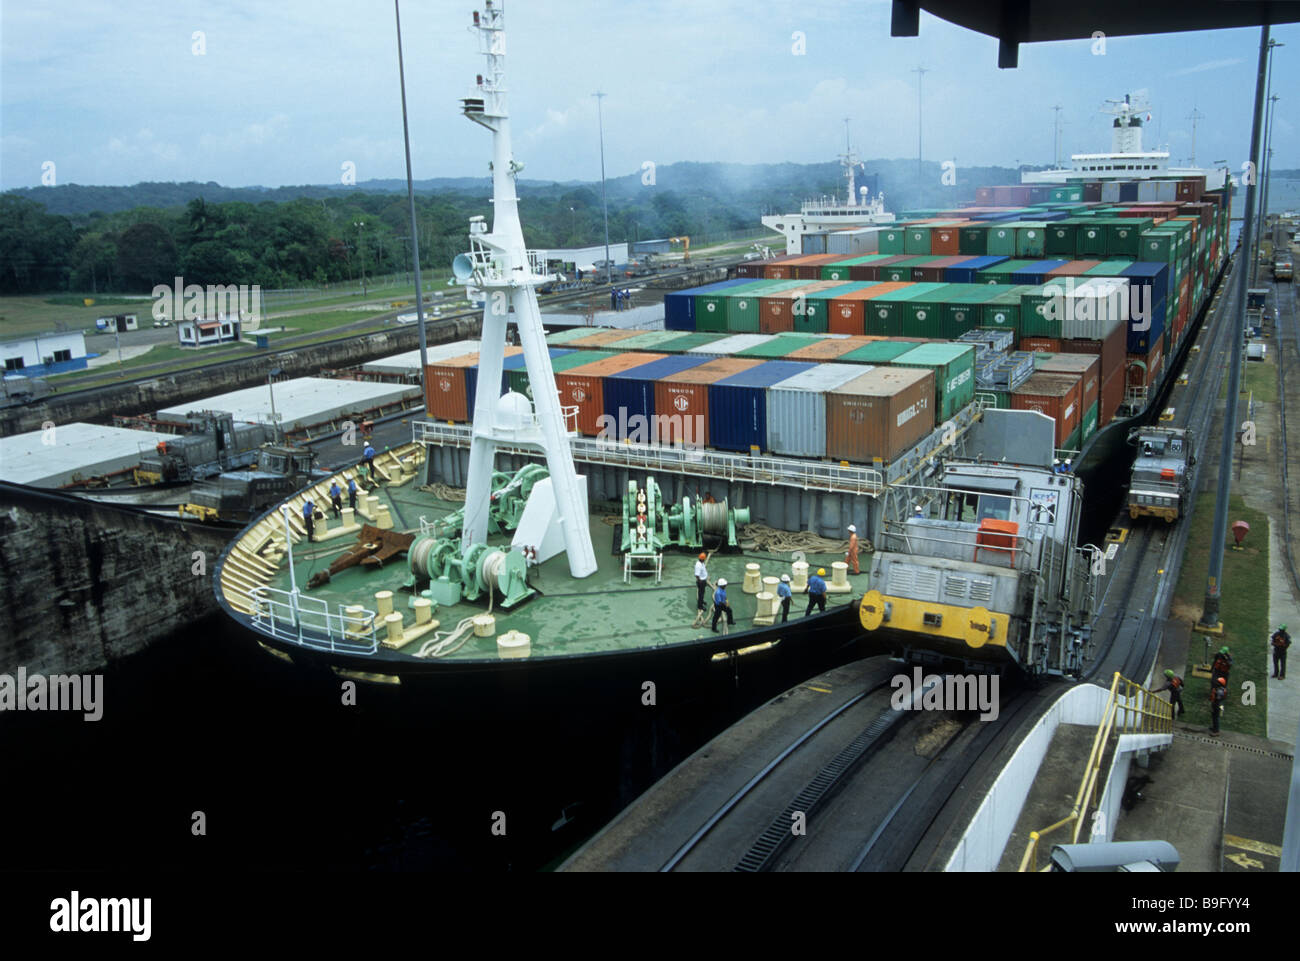 Container ship entering Gatun locks, Panama Canal. Train or 'mule' on RHS is guiding the ship Stock Photo